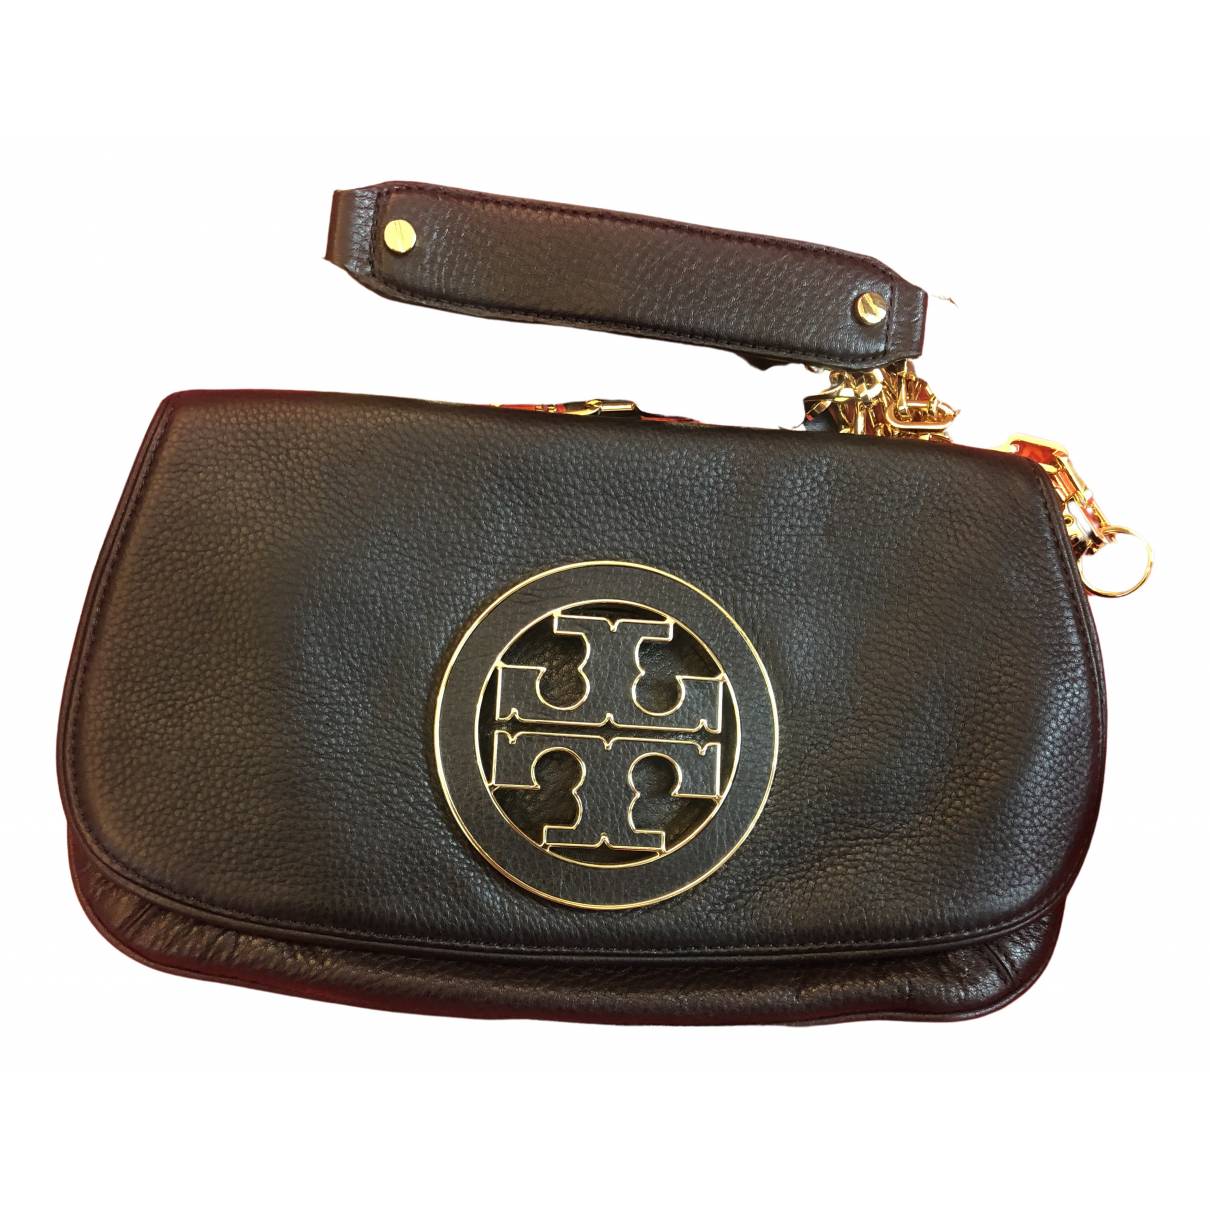 Leather clutch bag Tory Burch Black in Leather - 15624581